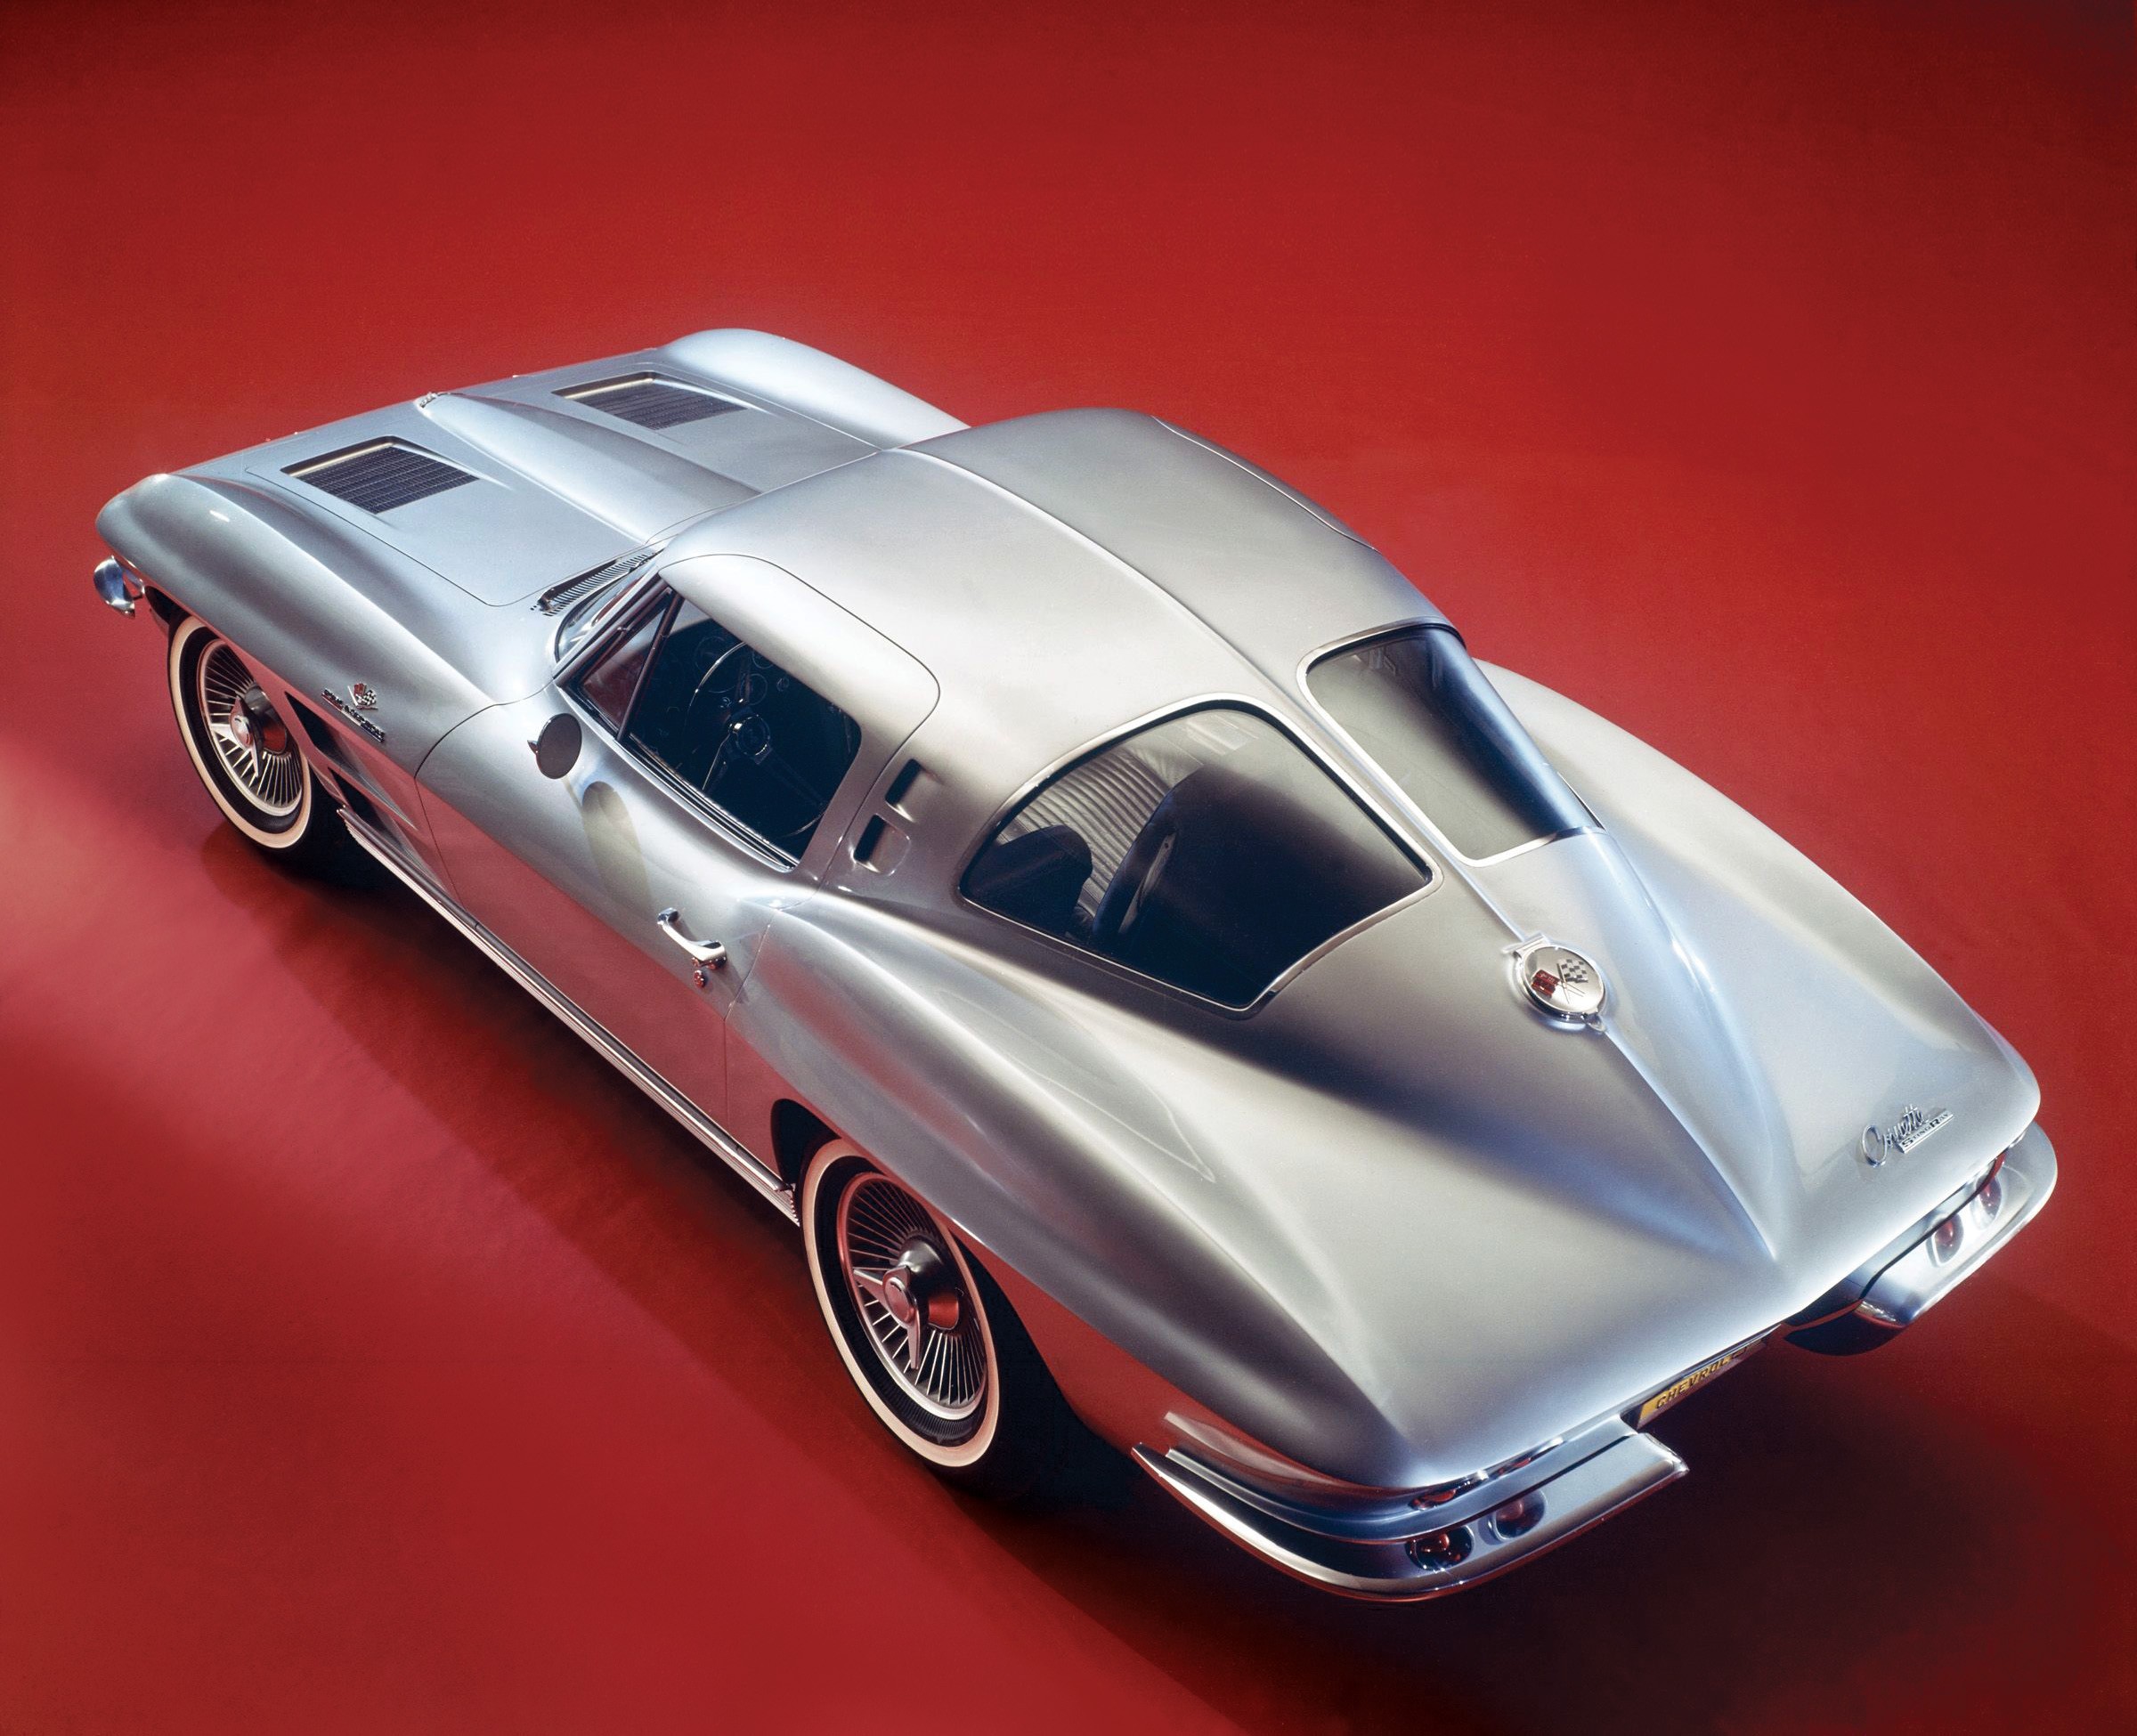 RPO Z06 Makes the New-For-'63 Chevrolet Corvette Sting Ray Race Ready and Extremely Valuable